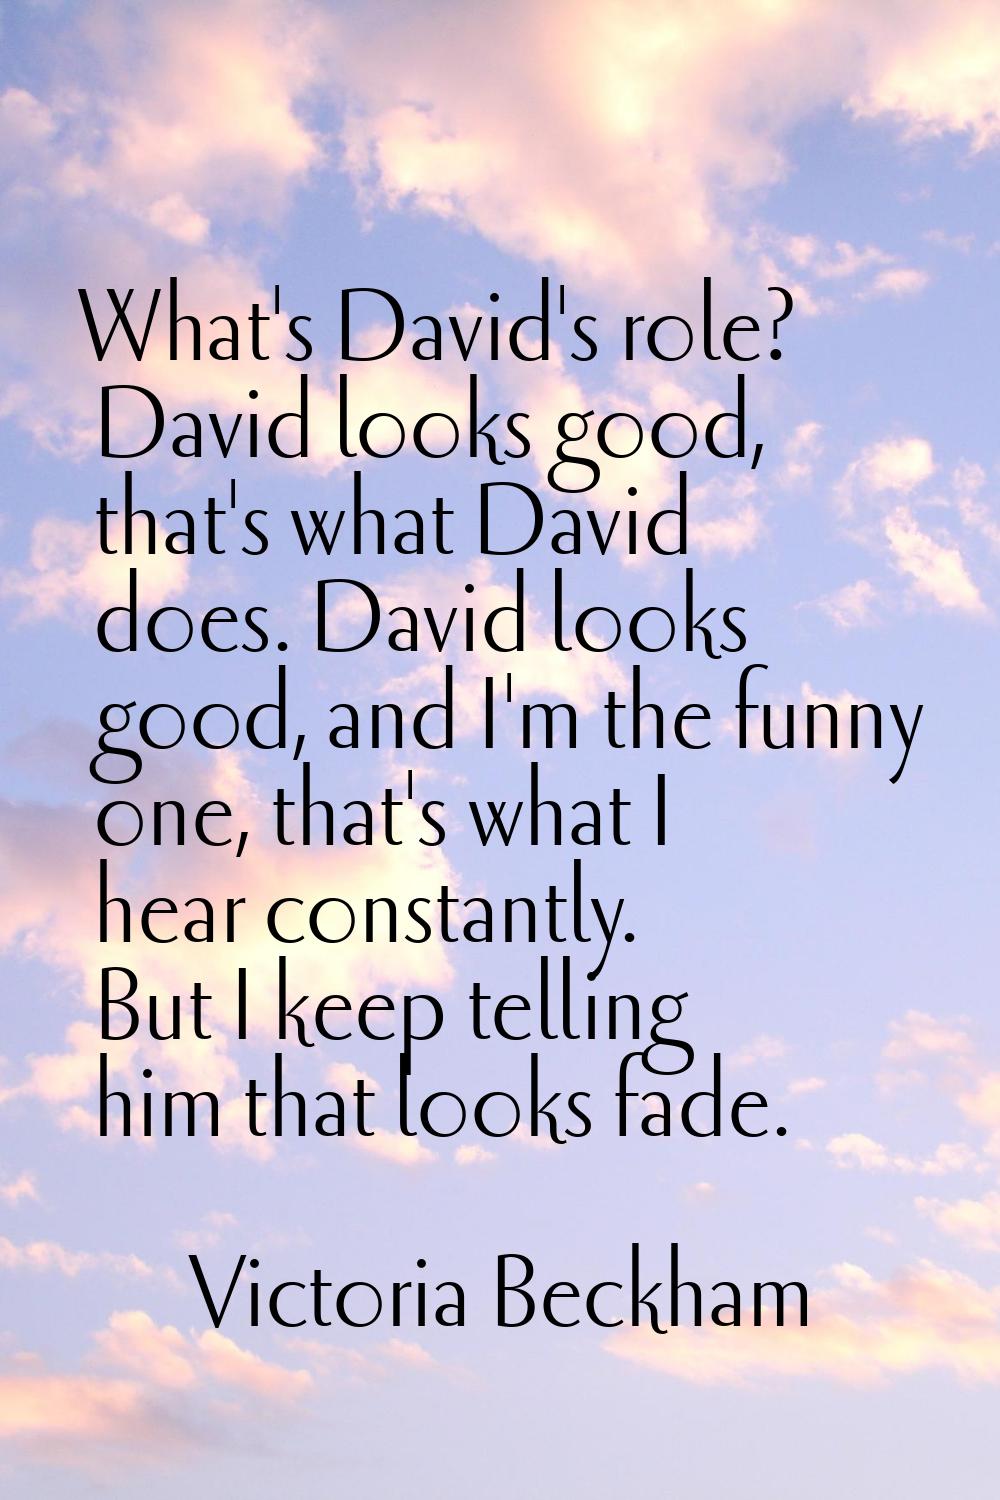 What's David's role? David looks good, that's what David does. David looks good, and I'm the funny 